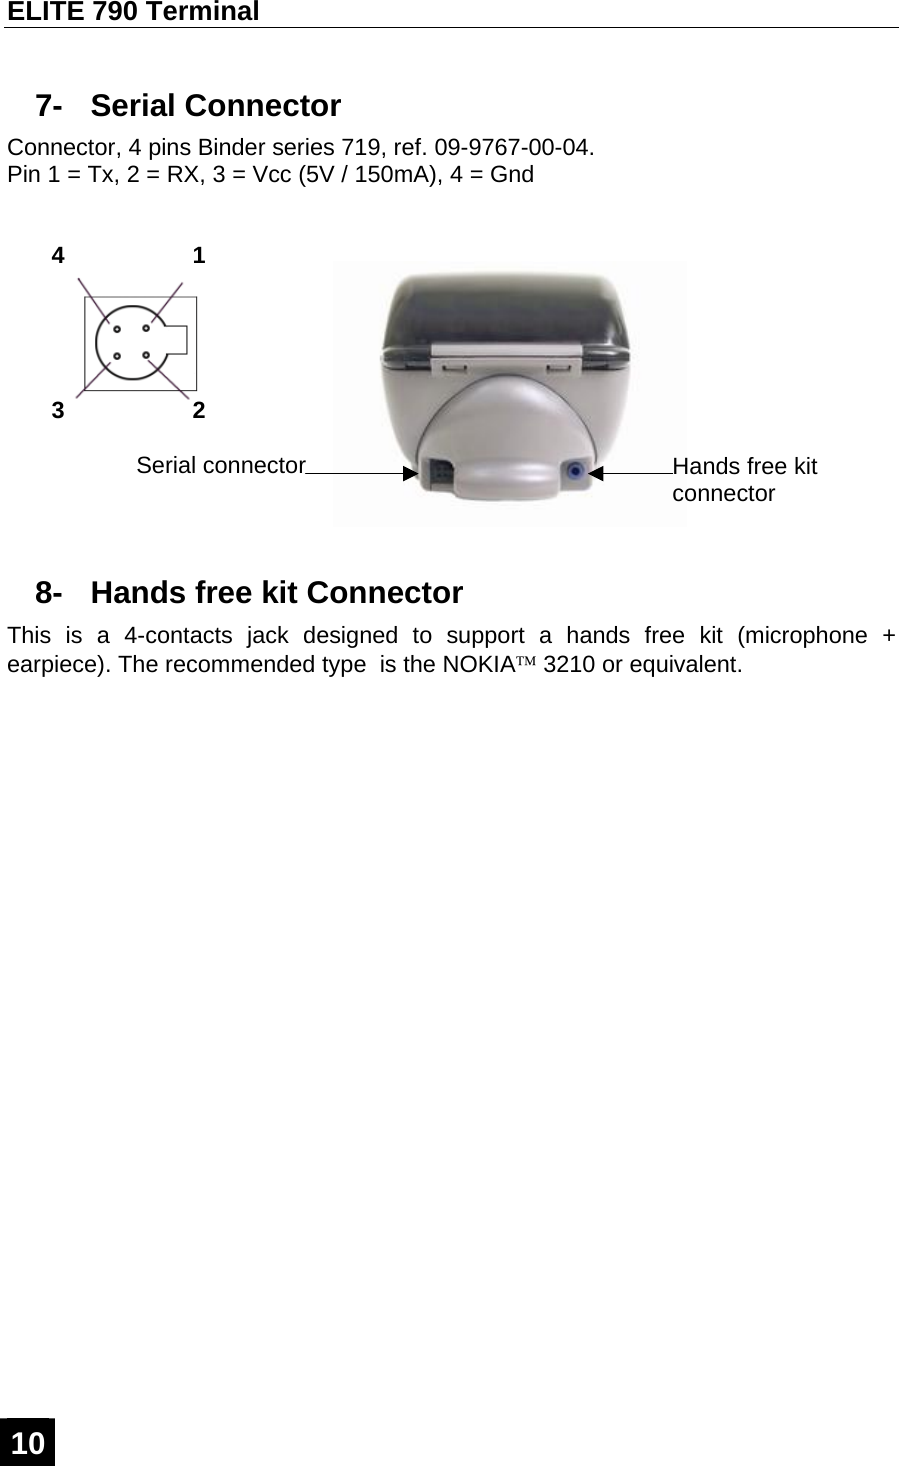 ELITE 790 Terminal  10  7- Serial Connector Connector, 4 pins Binder series 719, ref. 09-9767-00-04. Pin 1 = Tx, 2 = RX, 3 = Vcc (5V / 150mA), 4 = Gnd  8-  Hands free kit Connector This is a 4-contacts jack designed to support a hands free kit (microphone + earpiece). The recommended type  is the NOKIA™ 3210 or equivalent. Serial connector  Hands free kit connector 3 1 4 2 